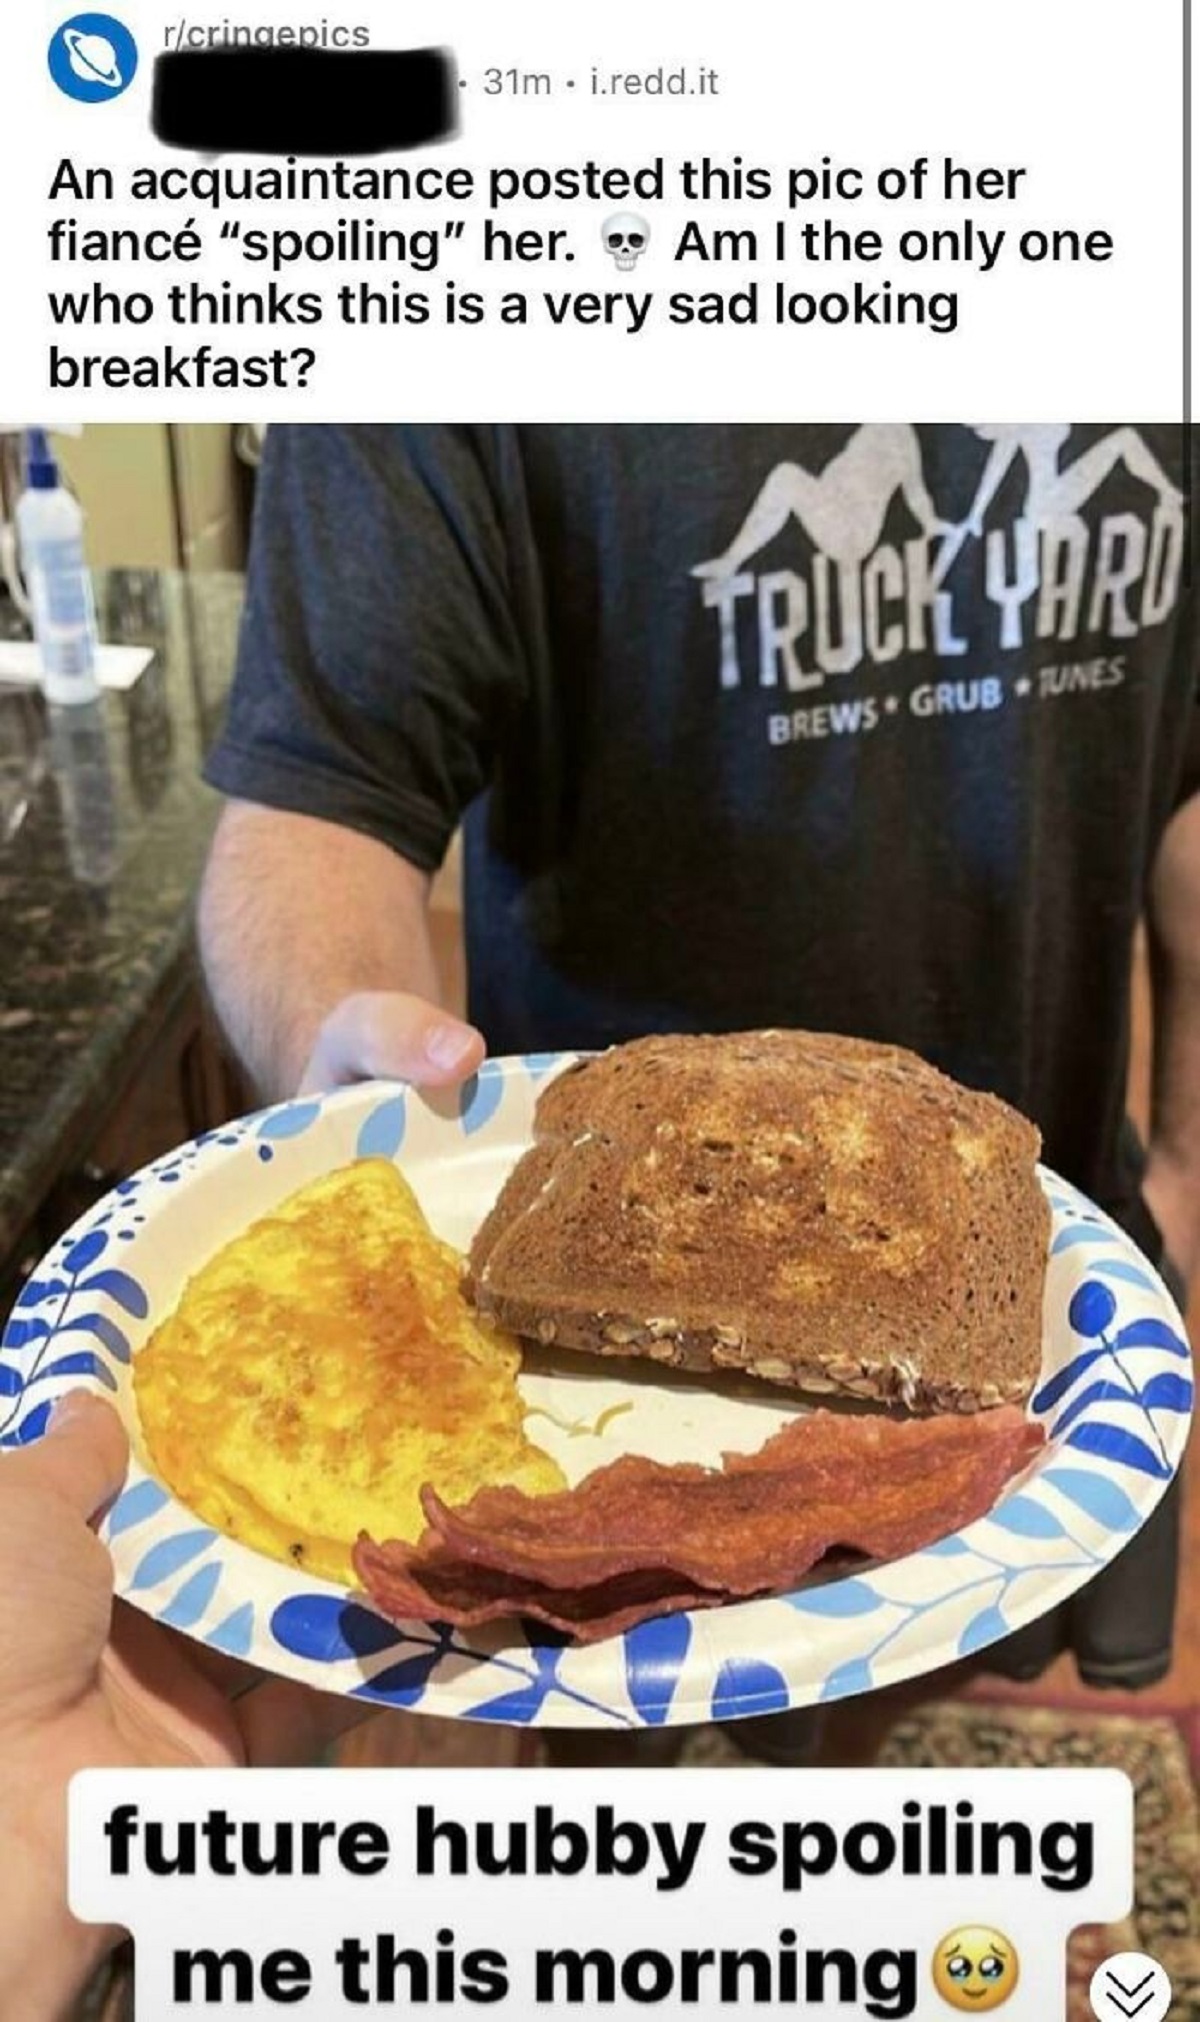 cringe pics - junk food - ricringenics 31m.reddit An acquaintance posted this pic of her fianc "spoiling" her. Am I the only one who thinks this is a very sad looking breakfast? Truck Yard Brews Grub Unes future hubby spoiling me this morning